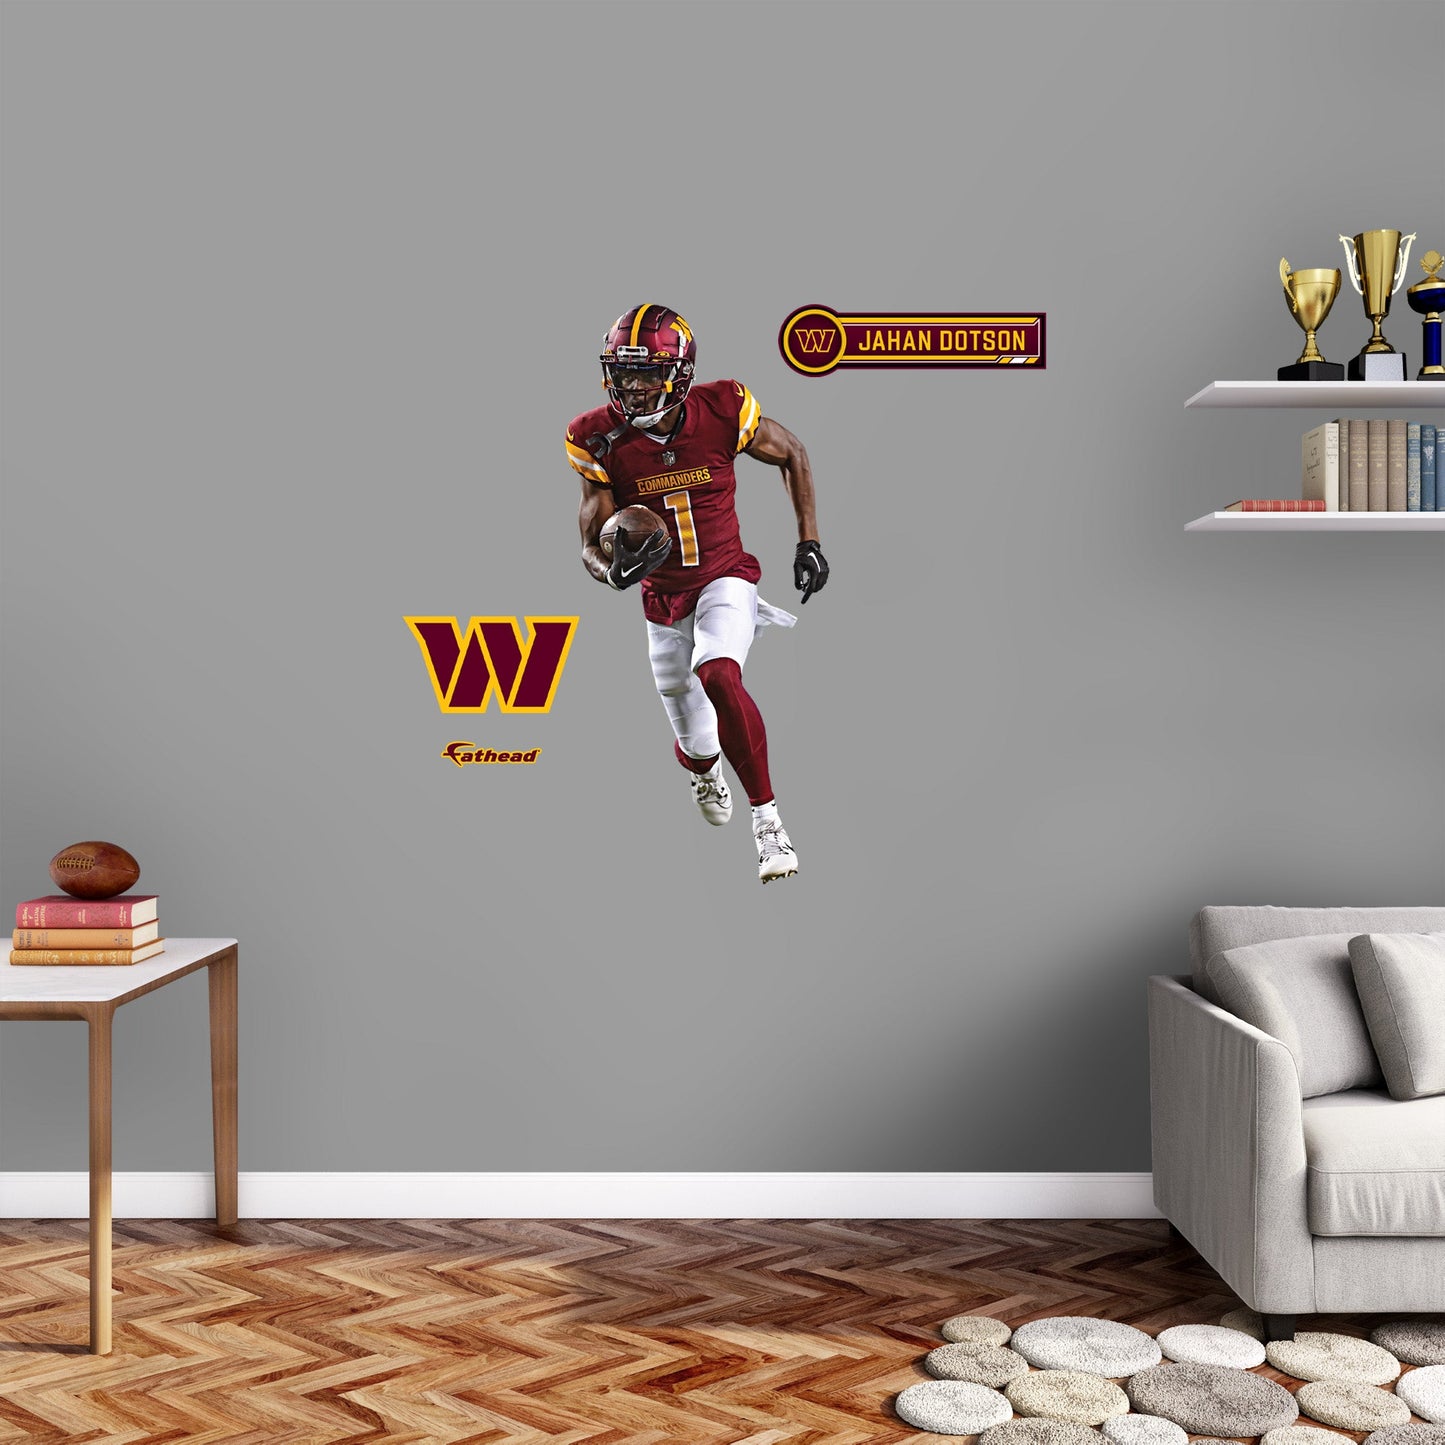 Washington Commanders: Jahan Dotson         - Officially Licensed NFL Removable     Adhesive Decal